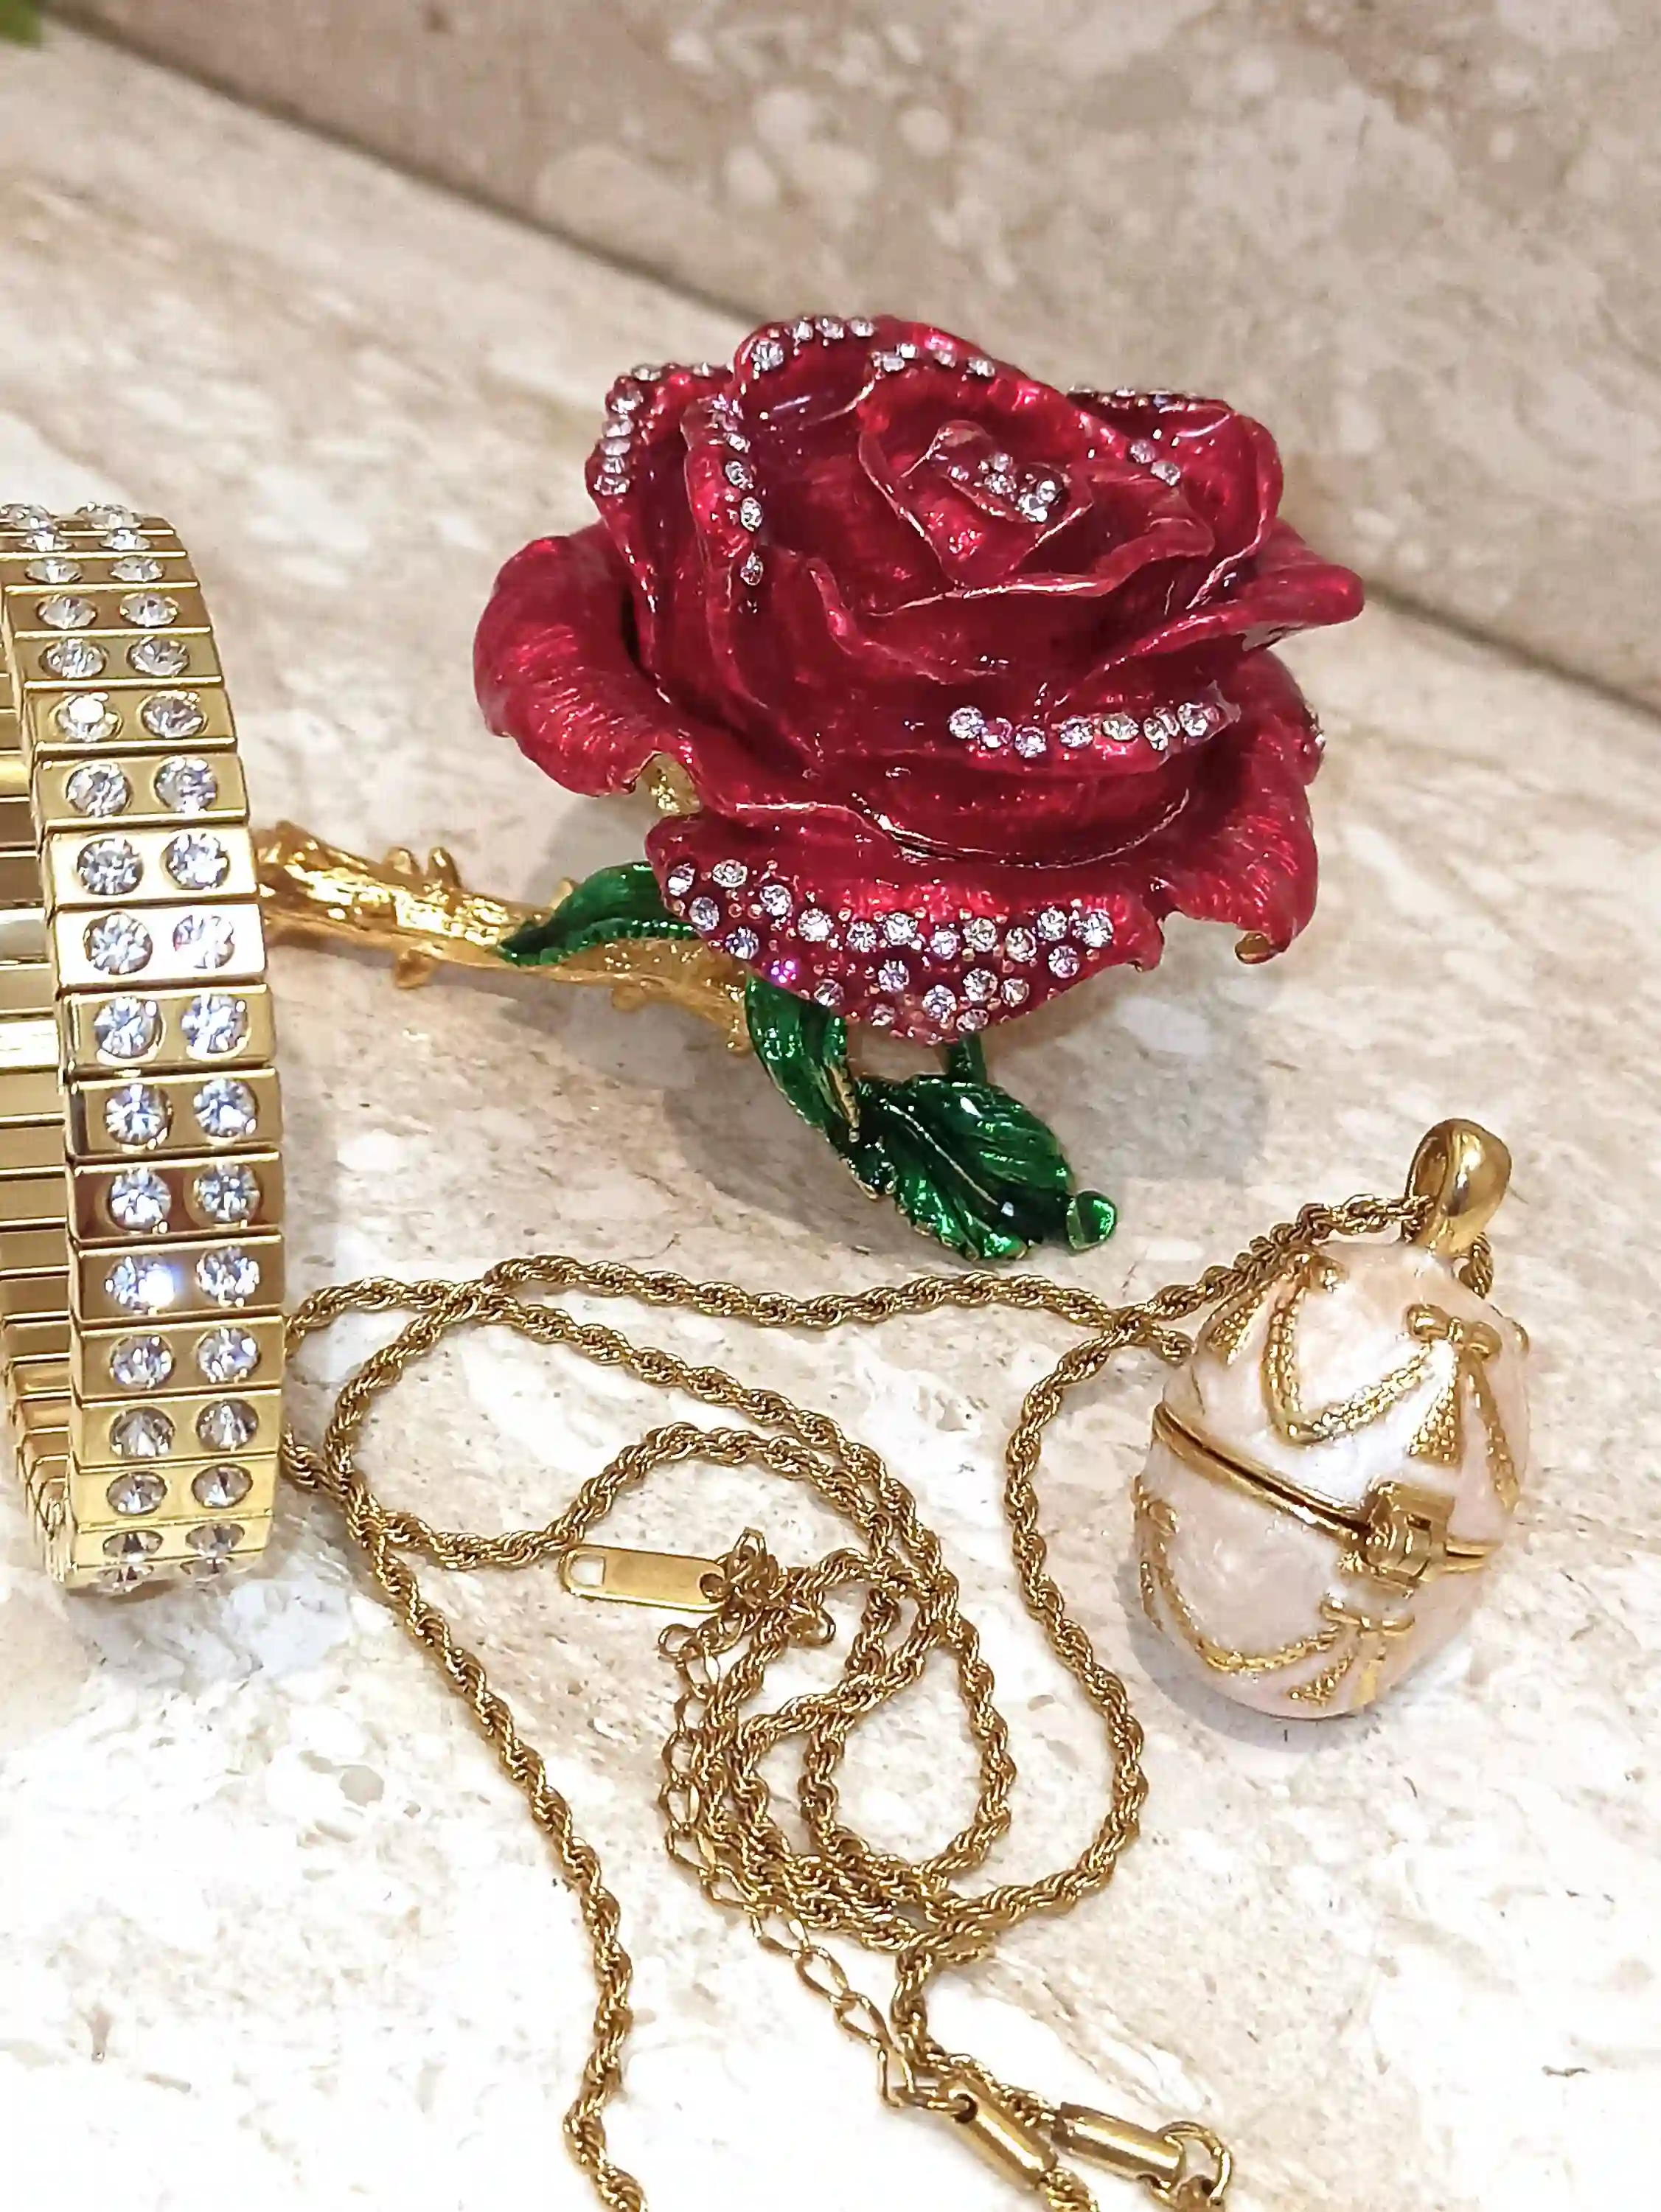 7ct - Luxury Valentines day - Faberge egg - Red Rose Valentine Ring box + Faberge Necklace + Bracelet -Handmade Valentines day gift-24K GOLD 